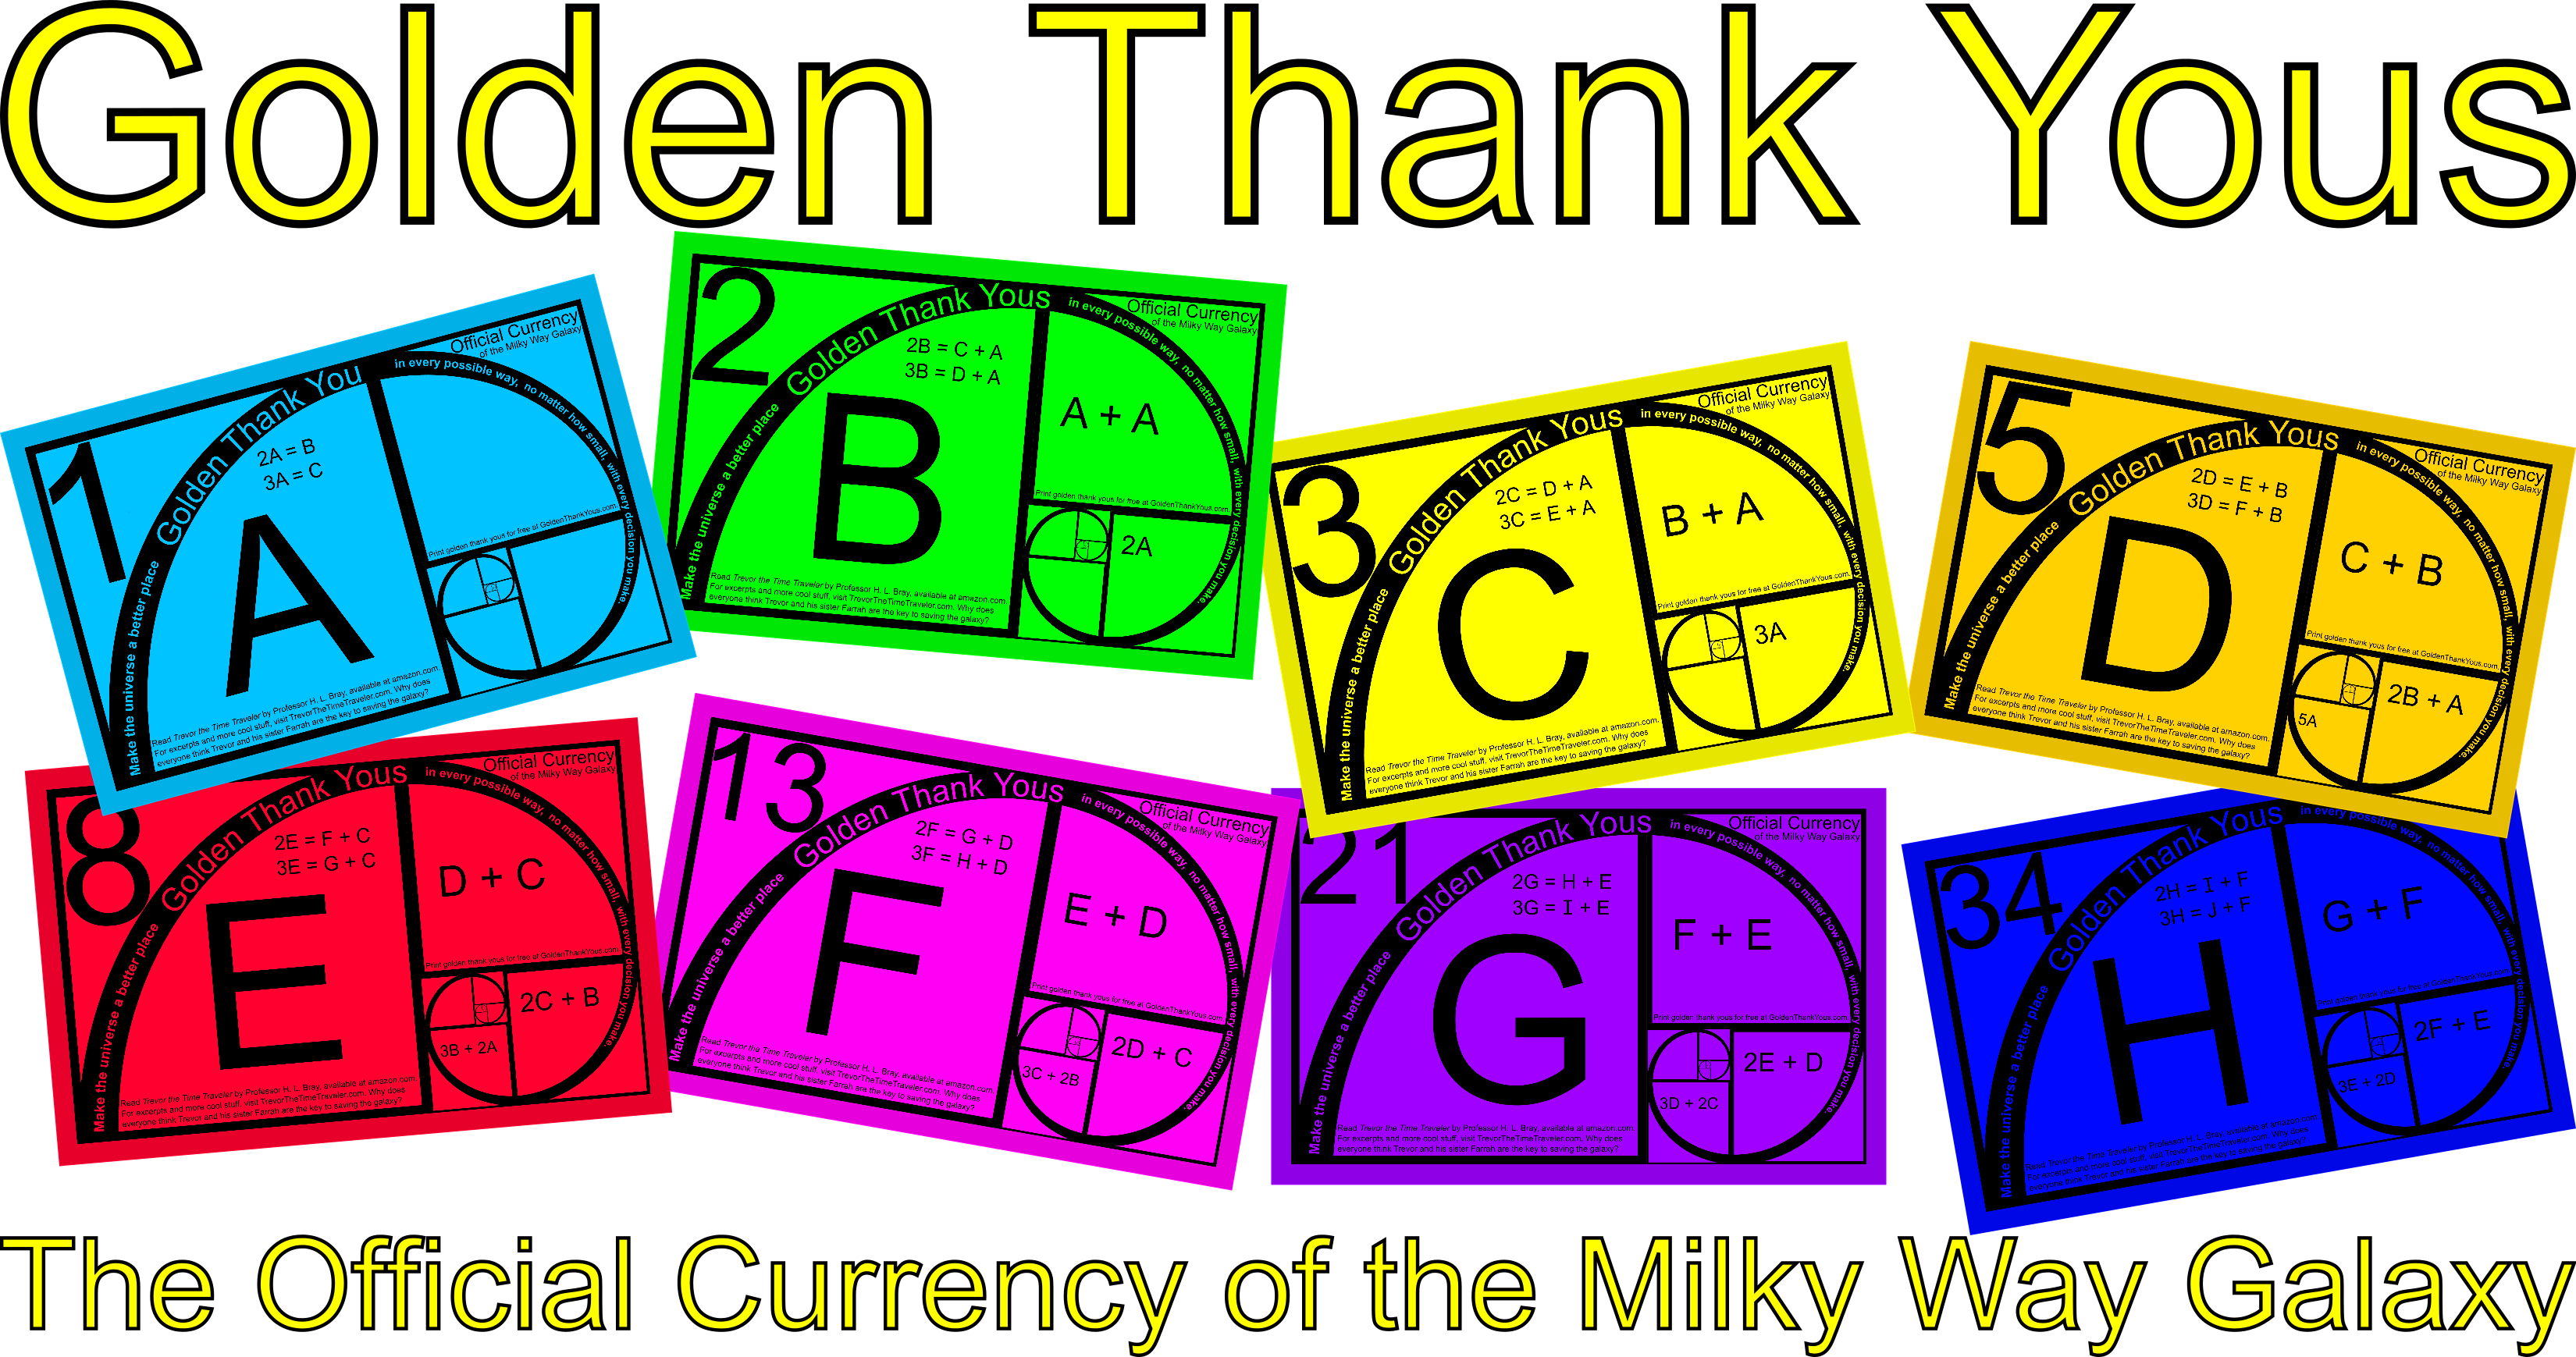 Golden Thank Yous: The Official Currency of the Milky Way Galaxy